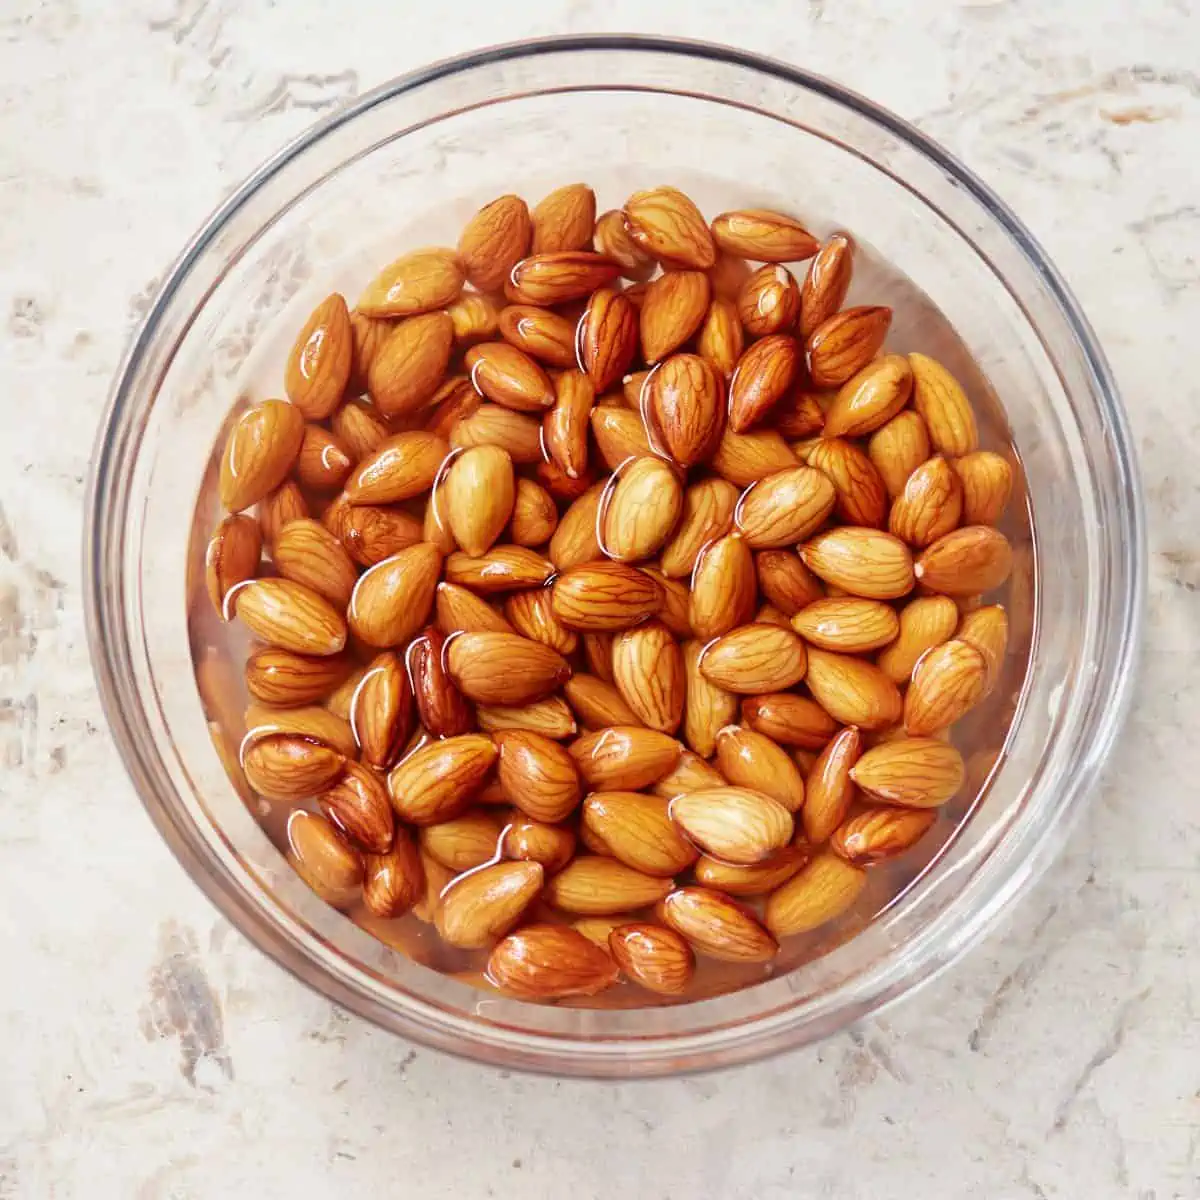 Whole almonds soaking in hot water in a glass bowl.